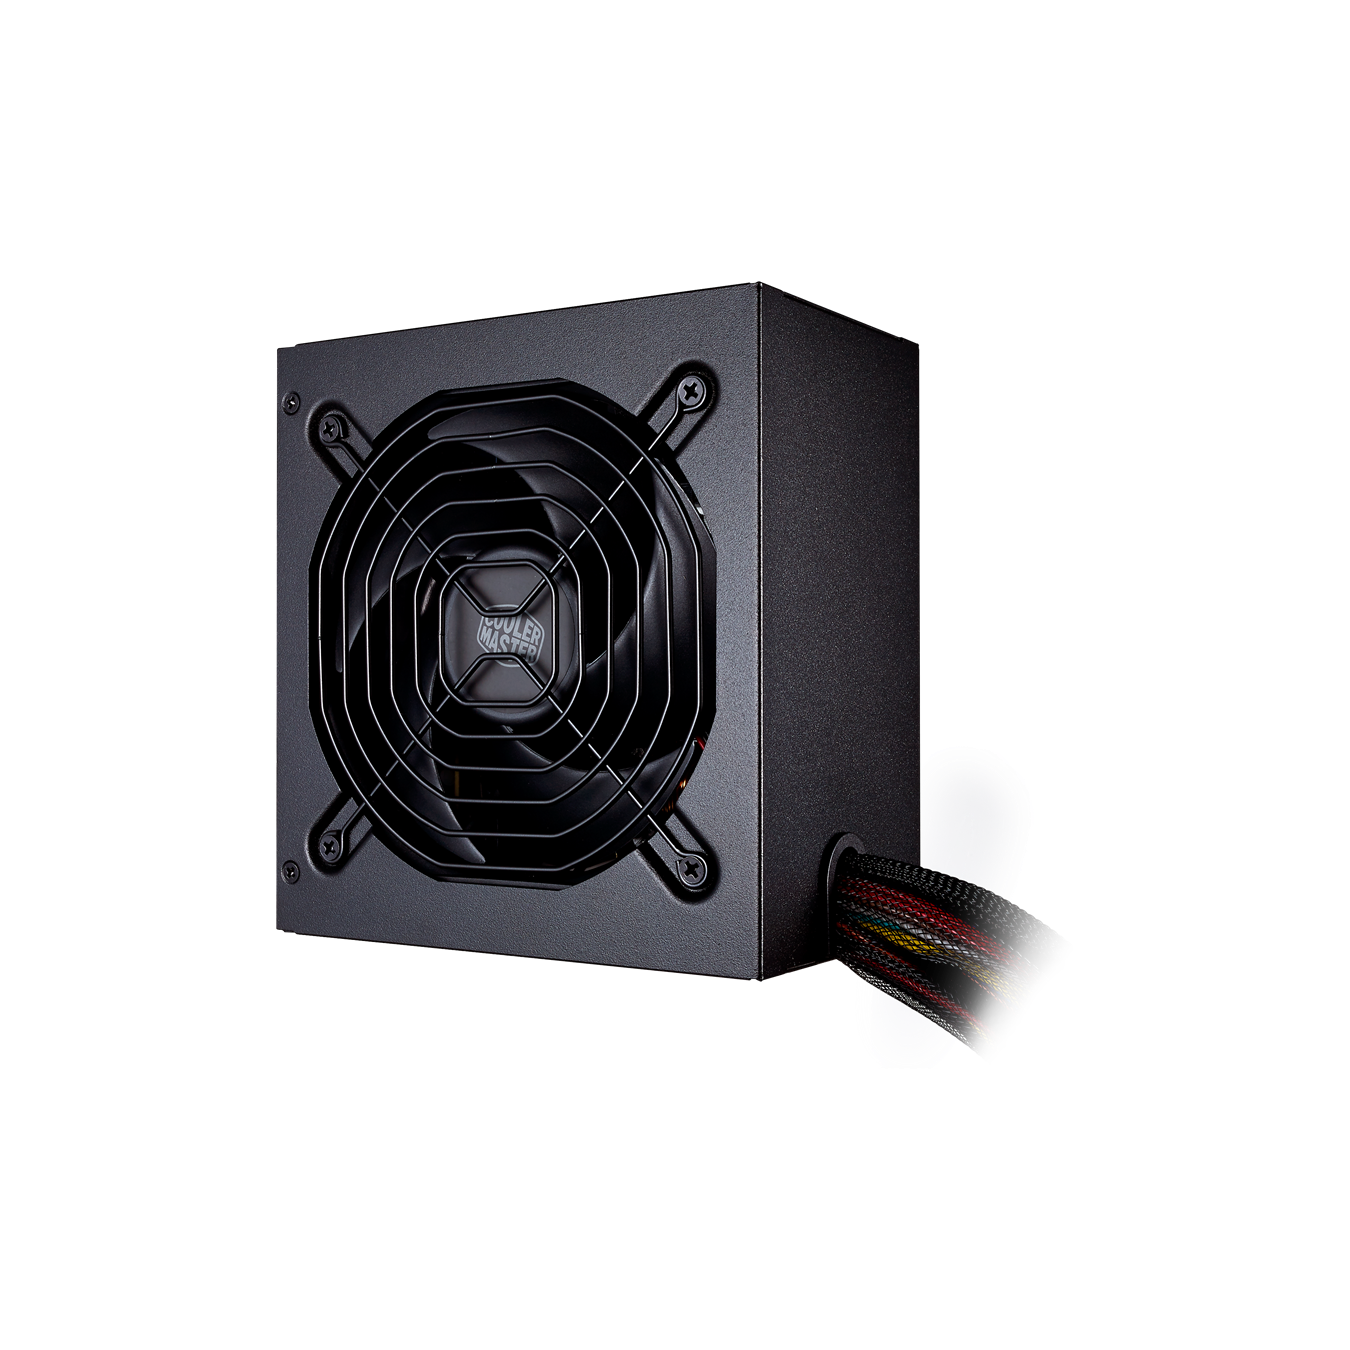 MWE Bronze 650 - Silencio technology combines sealed LDB bearings with quiet fan blades delivering a long lifetime of quiet cooling.